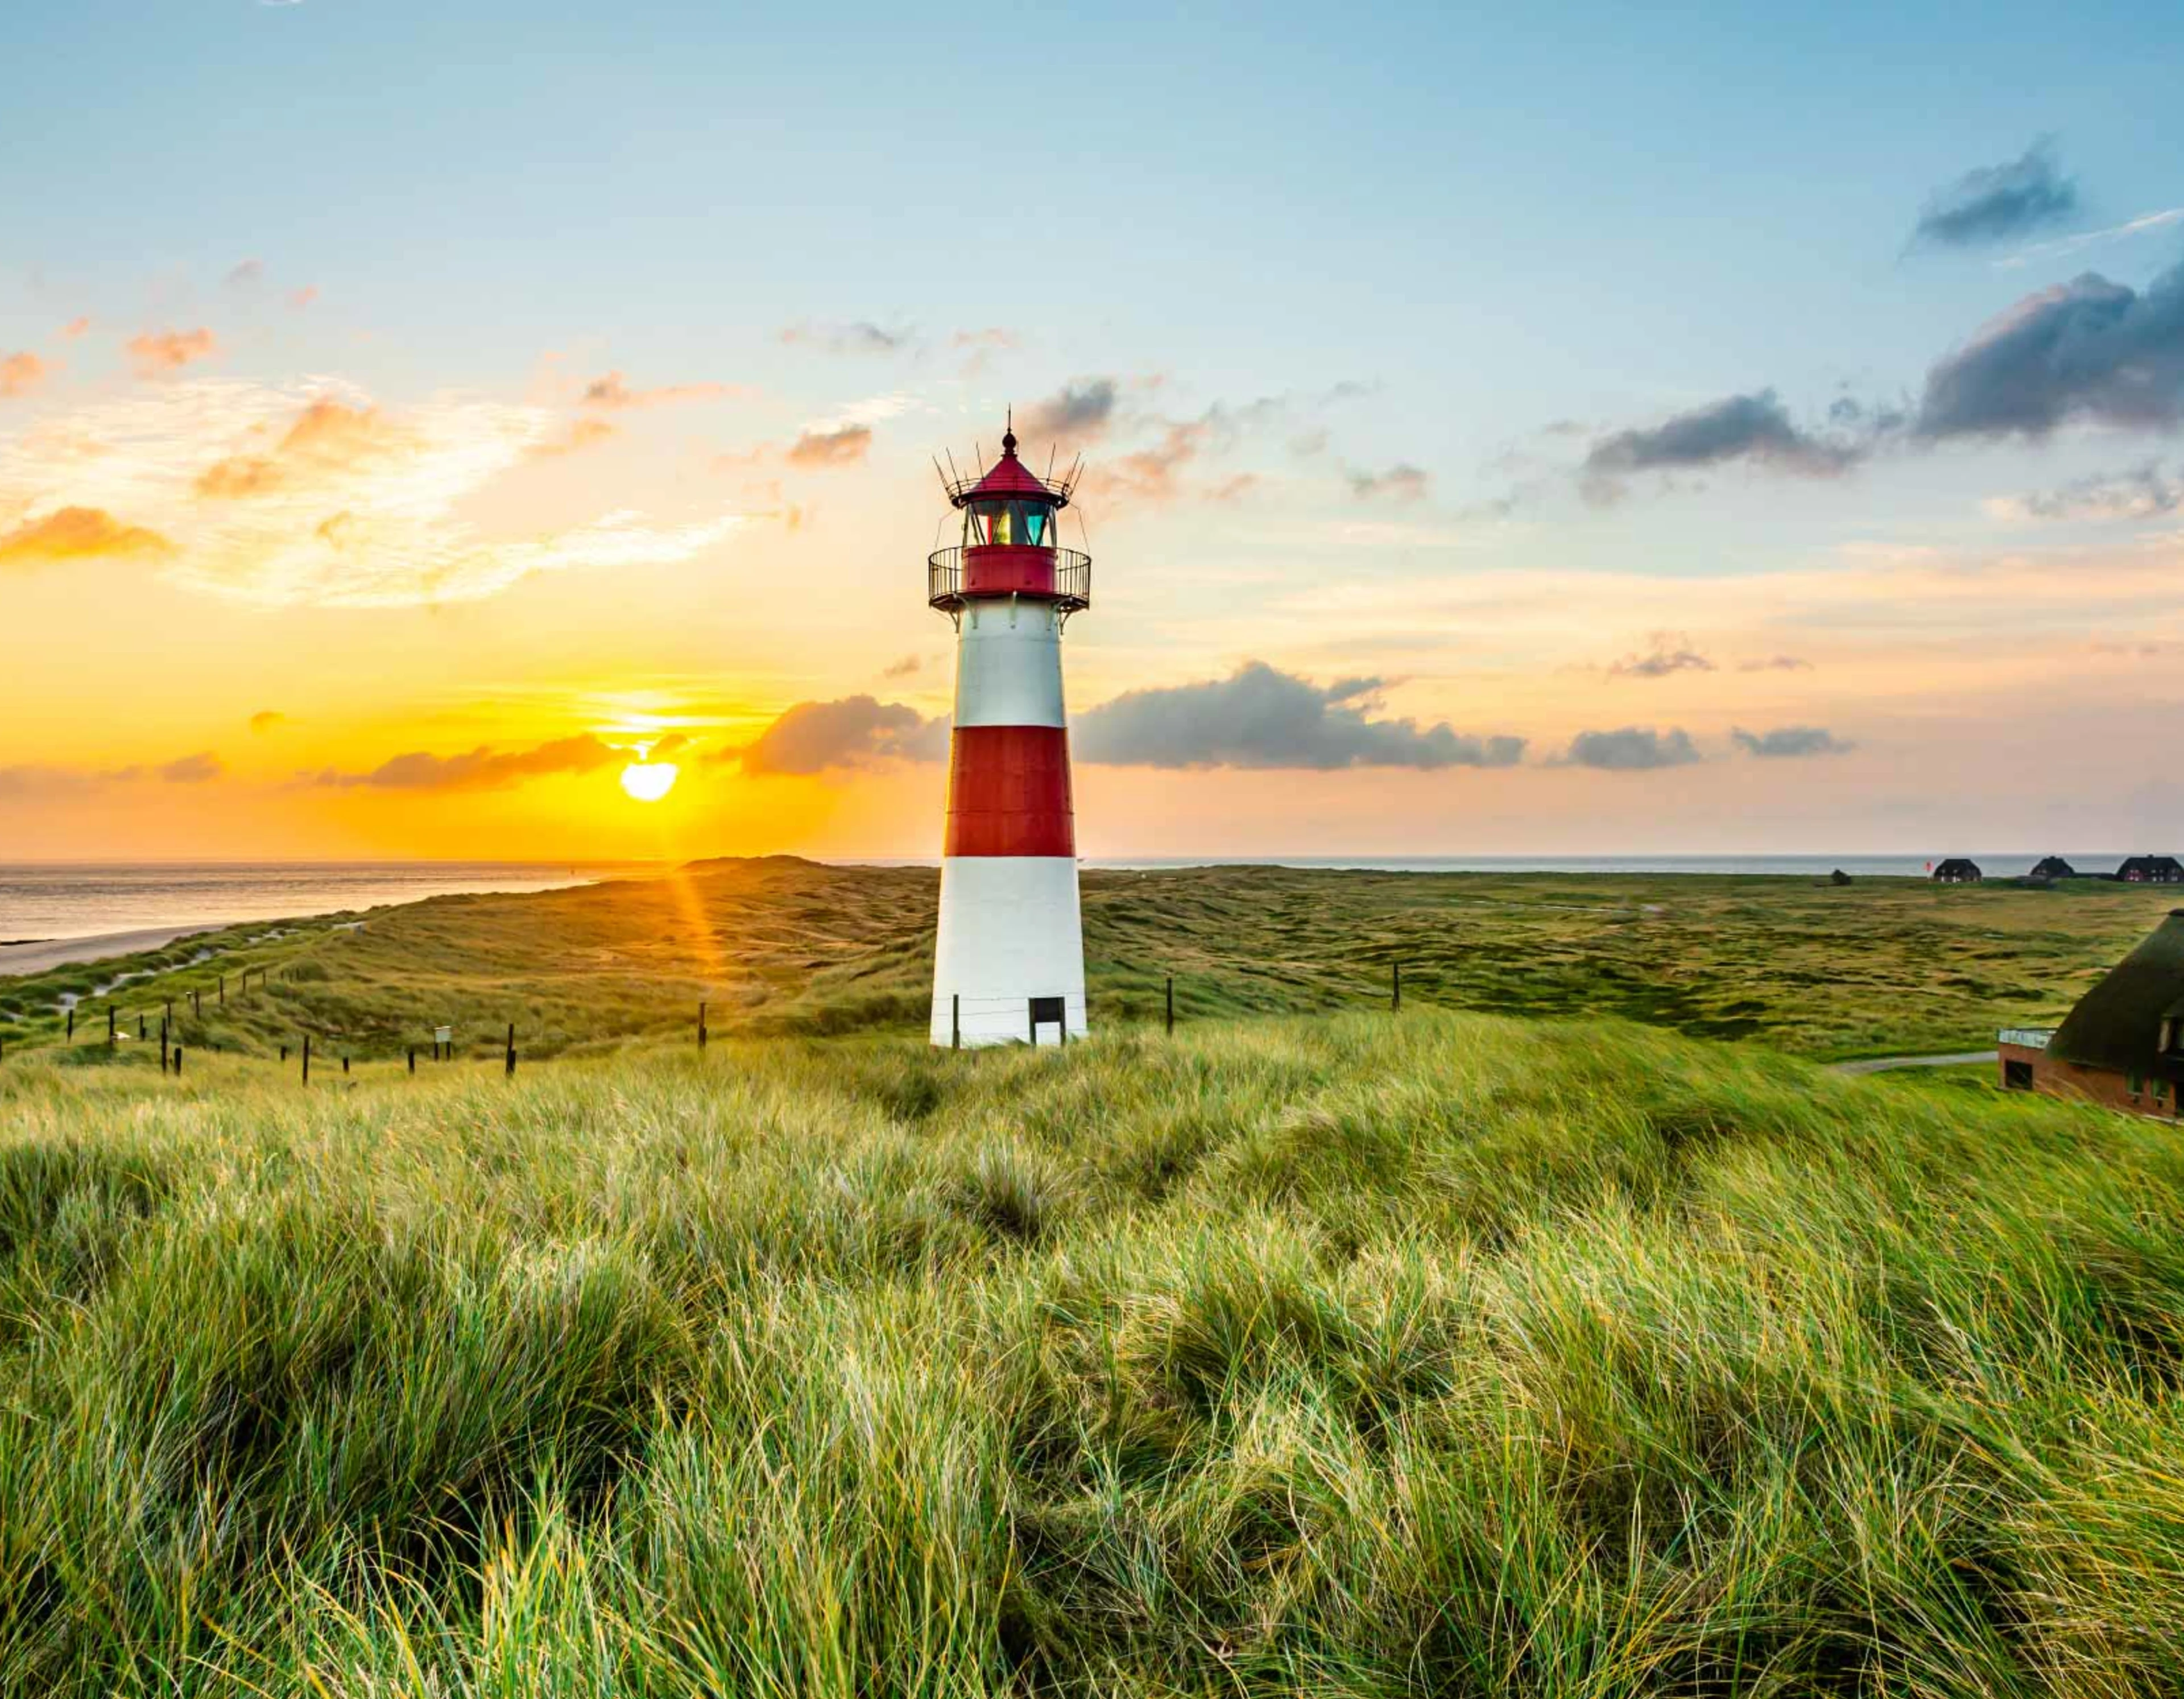 Stroll around the town or enjoy a walk over the grass-covered dunes of List and make your way to one of the 3 lighthouses in the area.